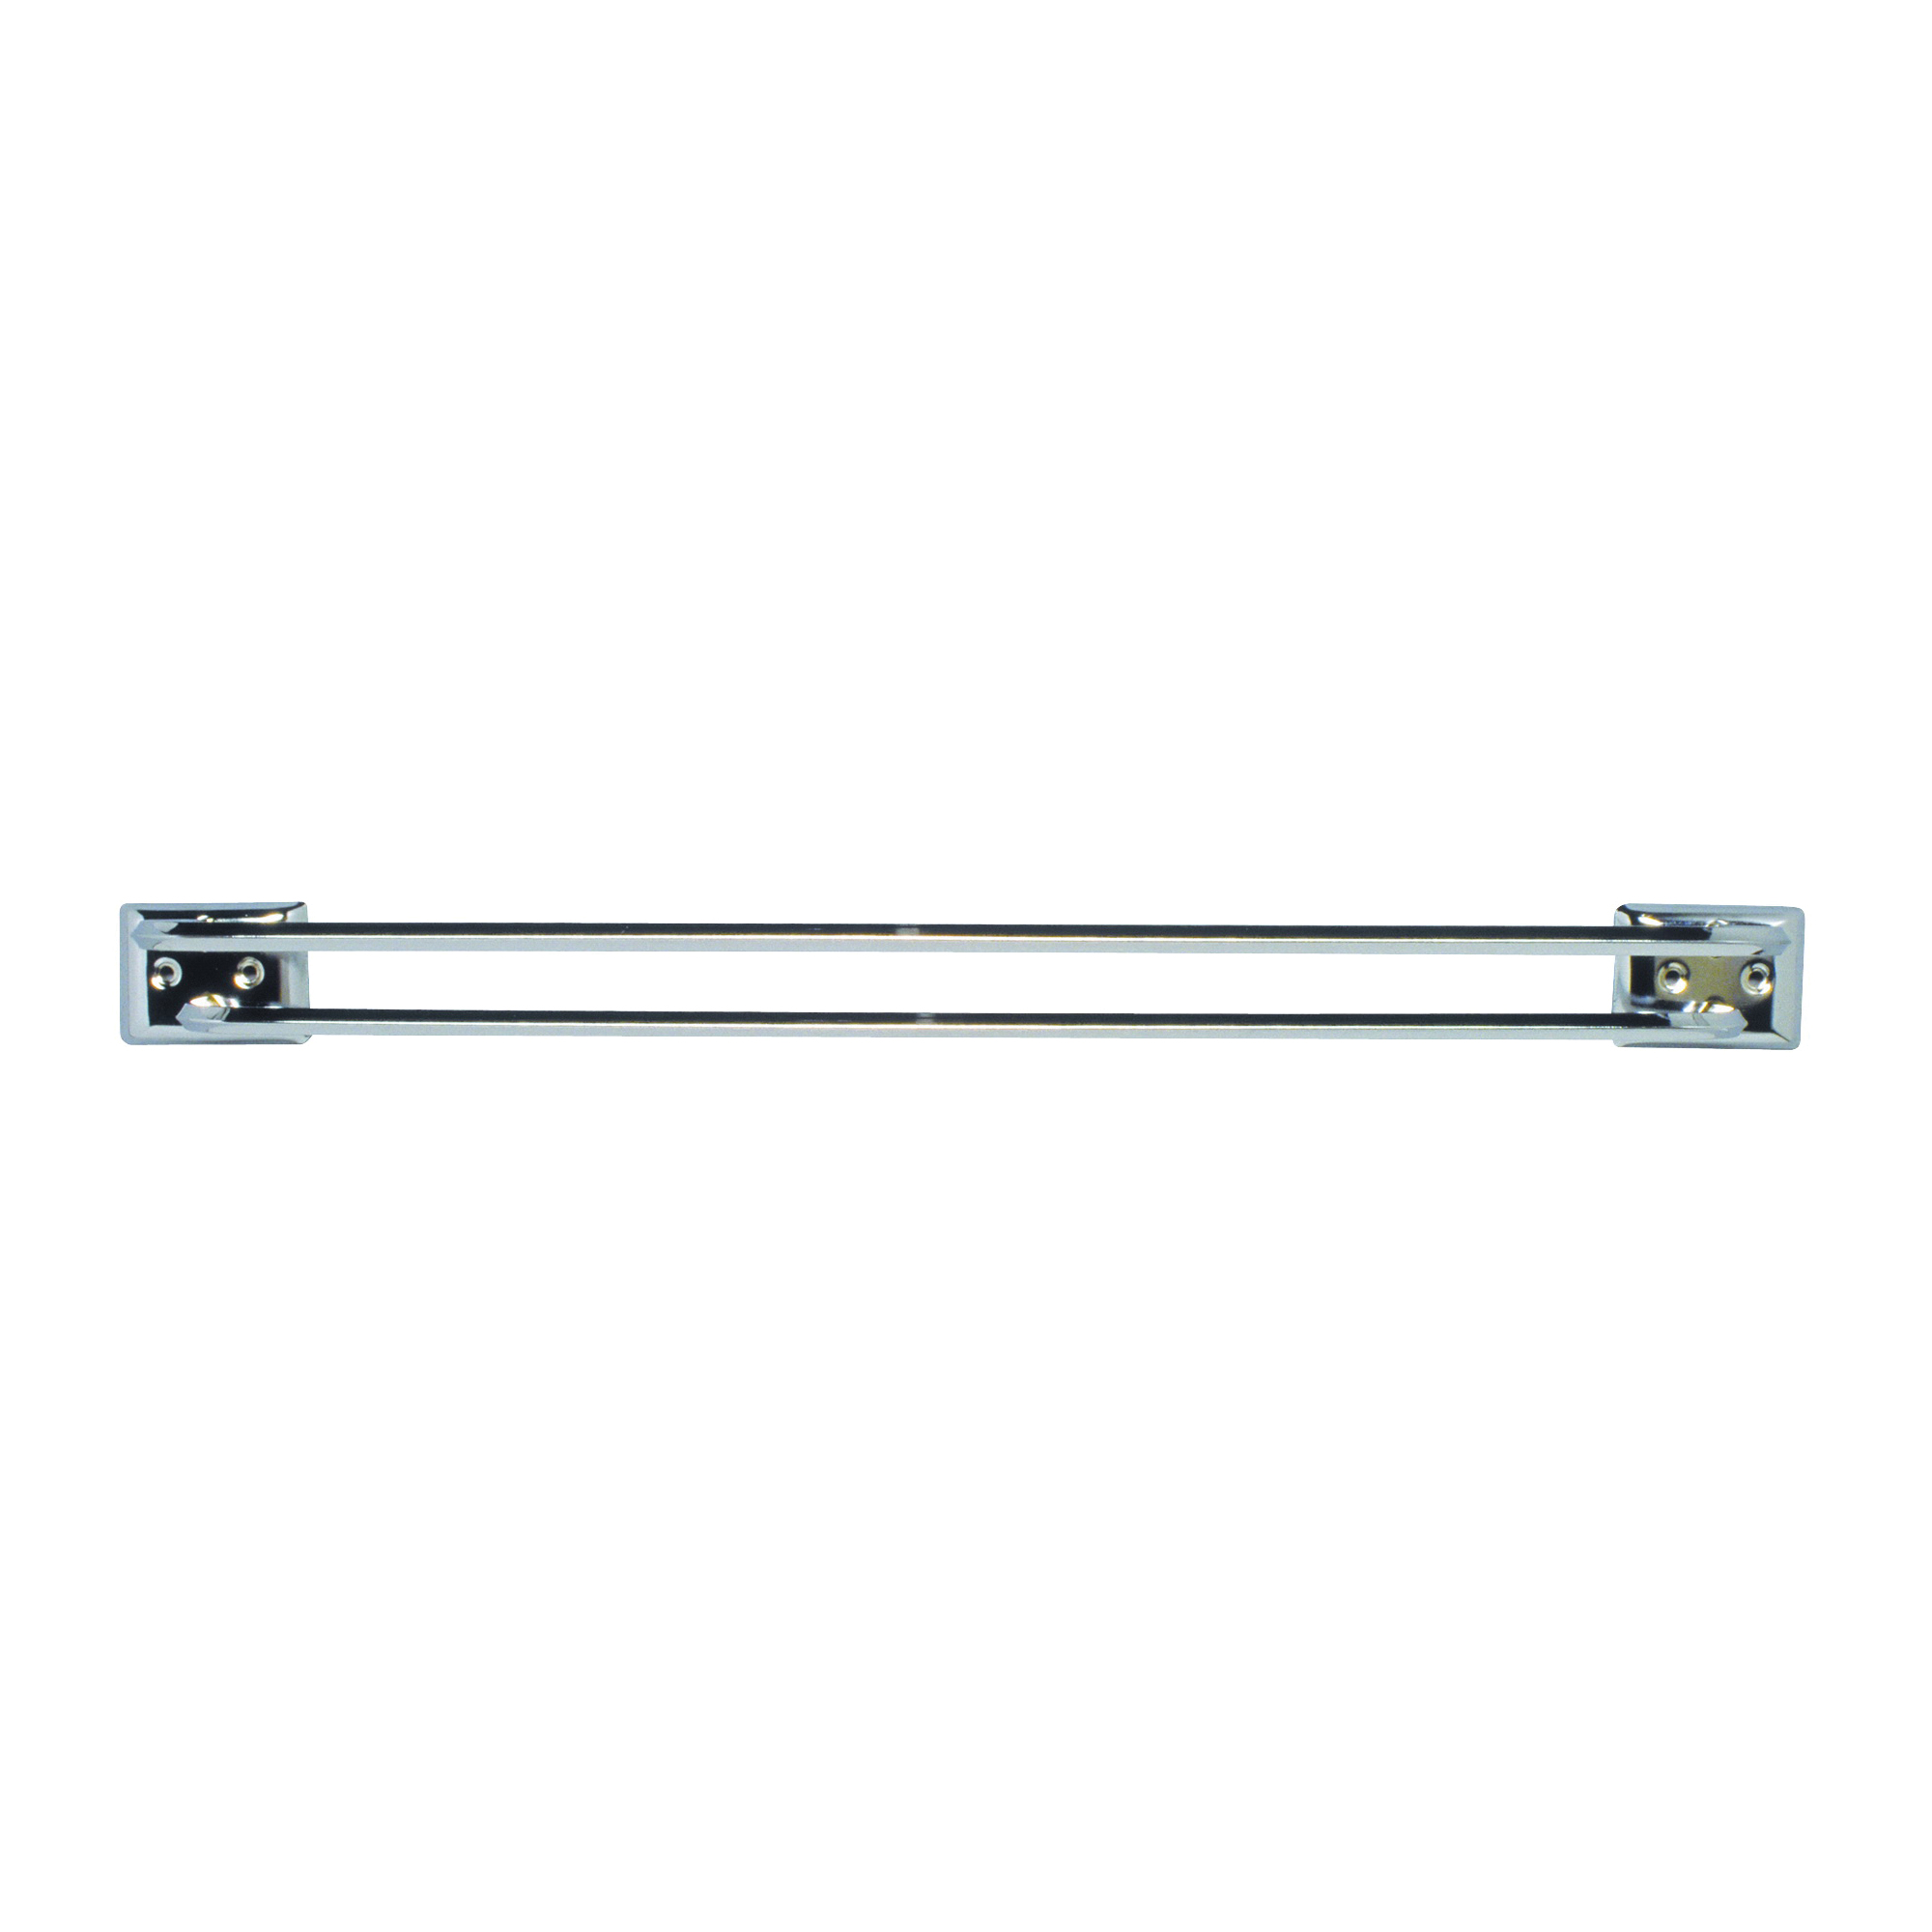 38140 Towel Bar, 18 in L Rod, Steel, Chrome, Surface Mounting